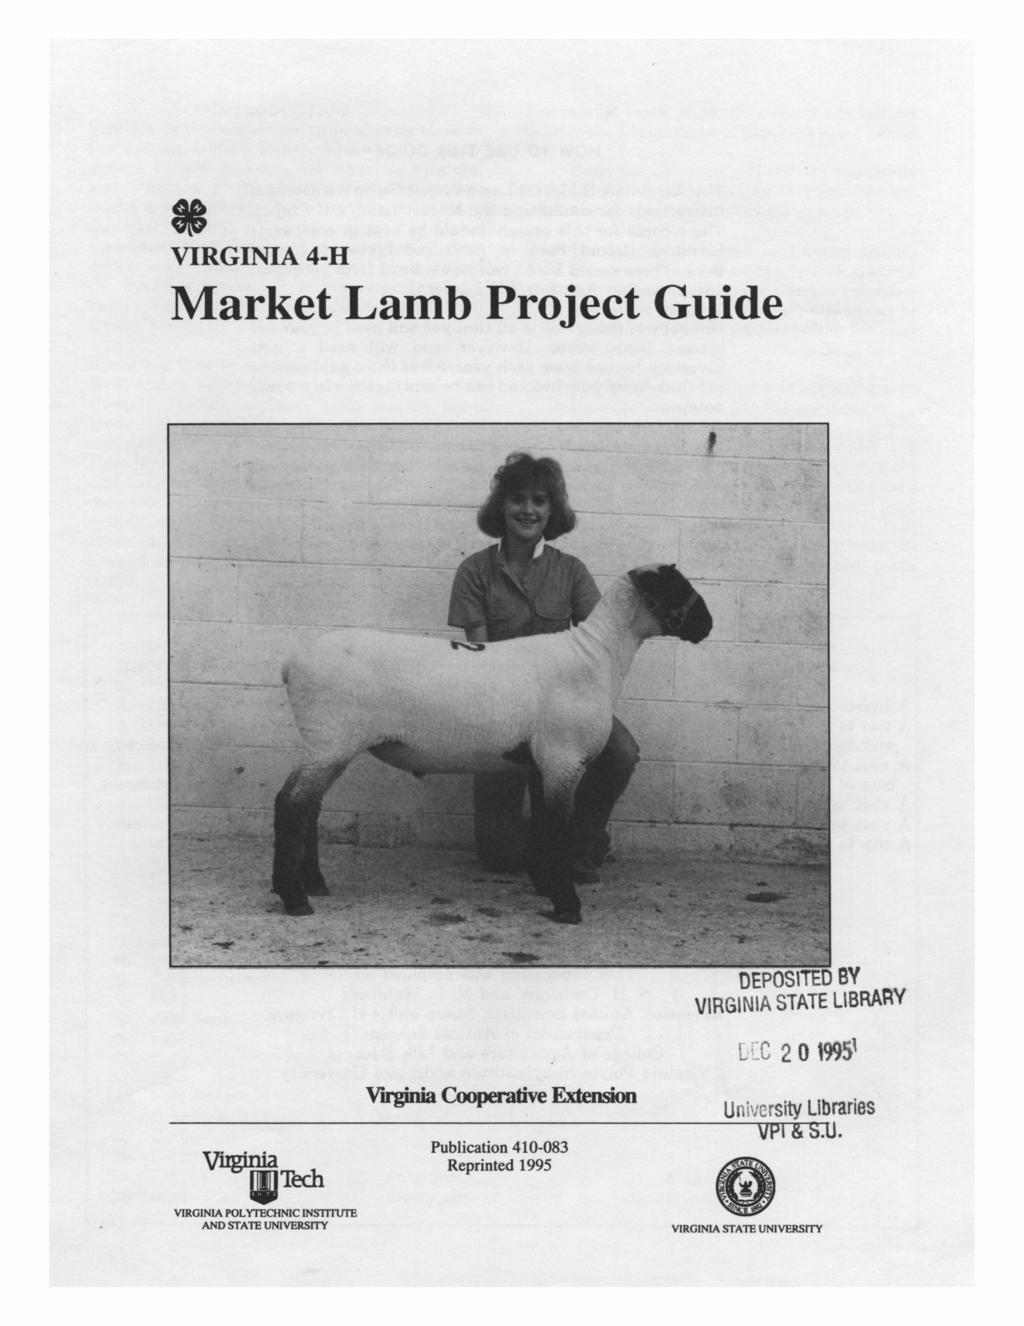 VIRGINIA 4-H Market Lamb Project Guide OEPOS\TED BY VIHGIN'A STATE LIBRARY r,;~c 2 0 199 ' v,tech.